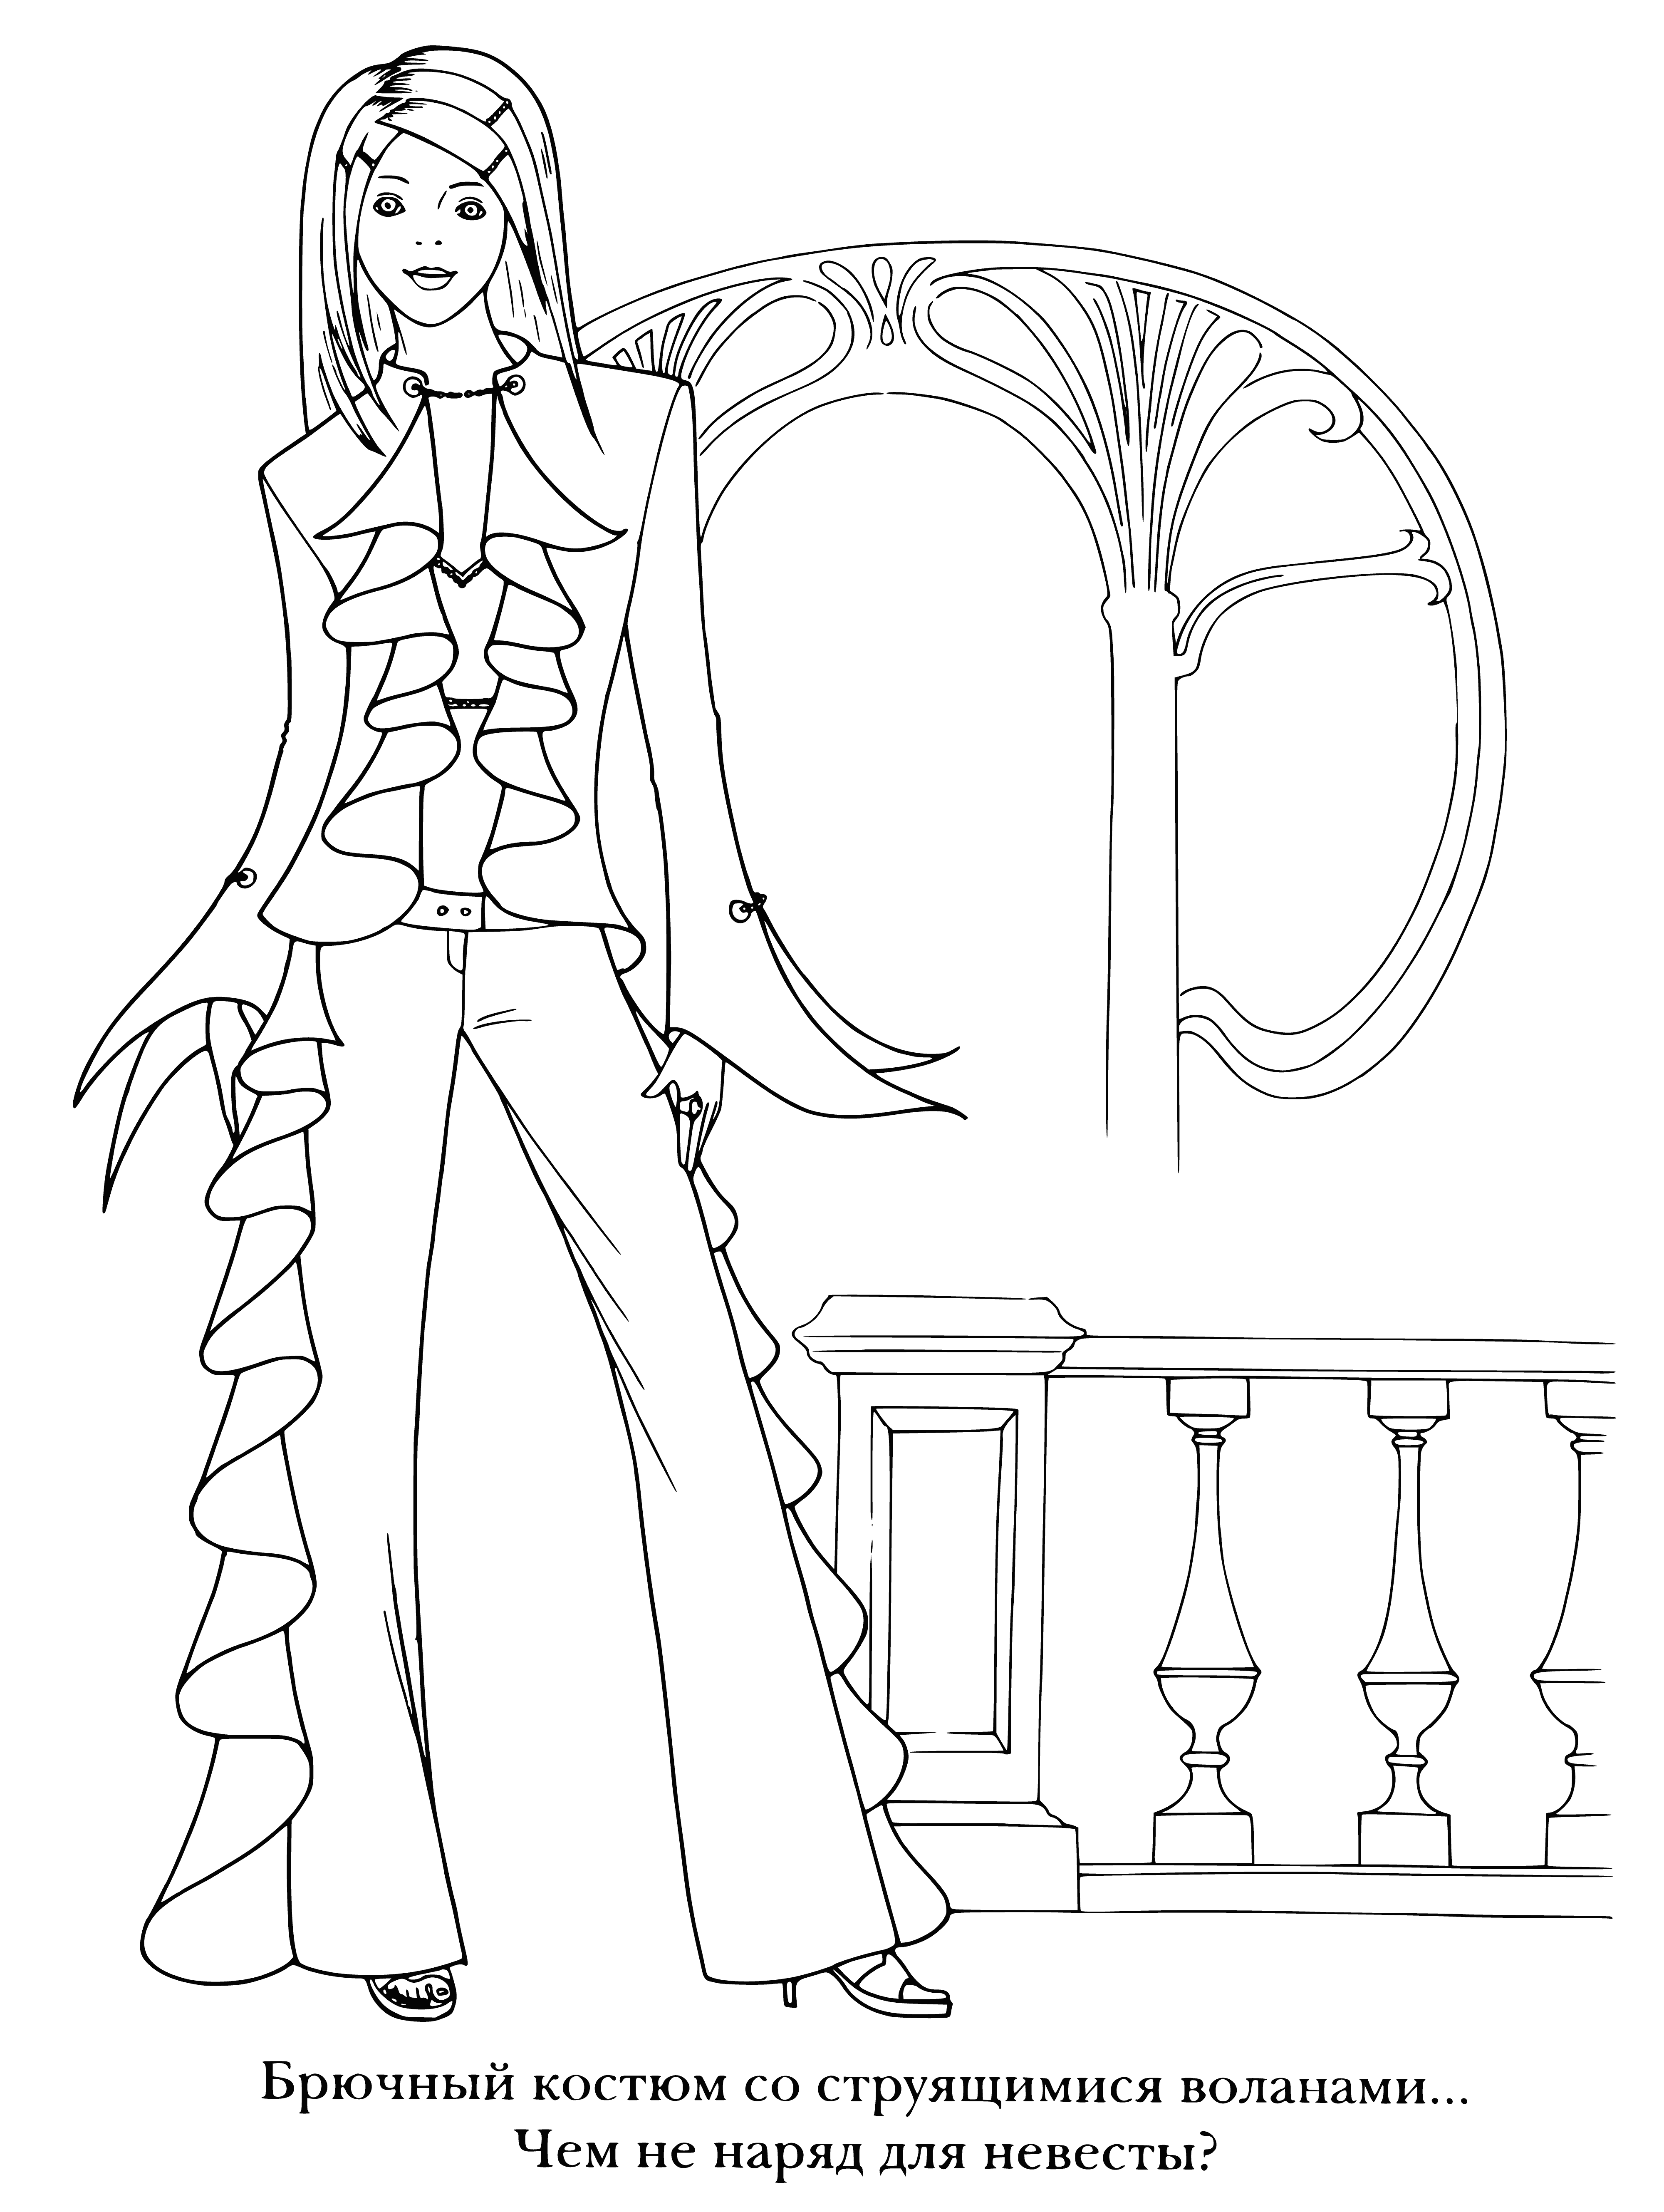 coloring page: Radiant bride radiates grace & elegance in sparkling white pantsuit; veil cascades down her back. We cannot look away.